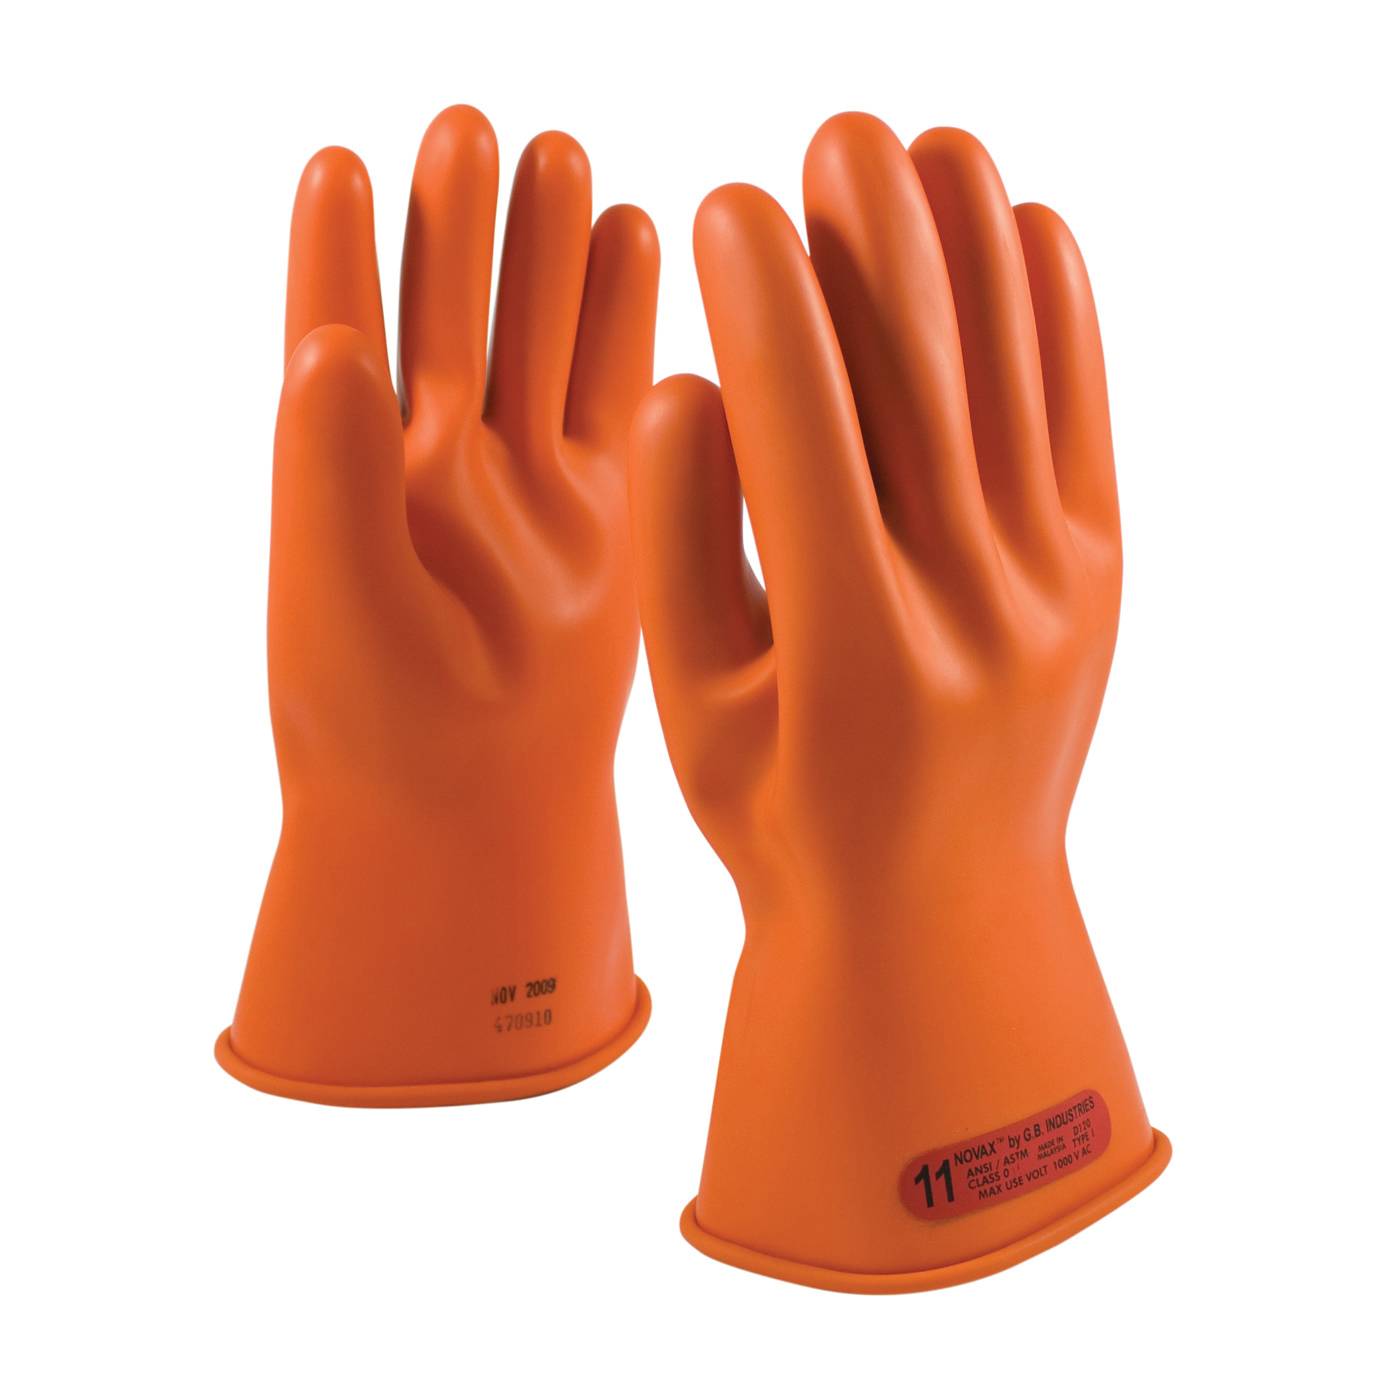 Novax® 147-0-11/10 Insulating Unisex Electrical Safety Gloves, SZ 10, Natural Rubber, Orange, 11 in L, ASTM Class: Class 0, 1000 VAC/1500 VDC Max Use Voltage (Discontinued by Manufacturer)